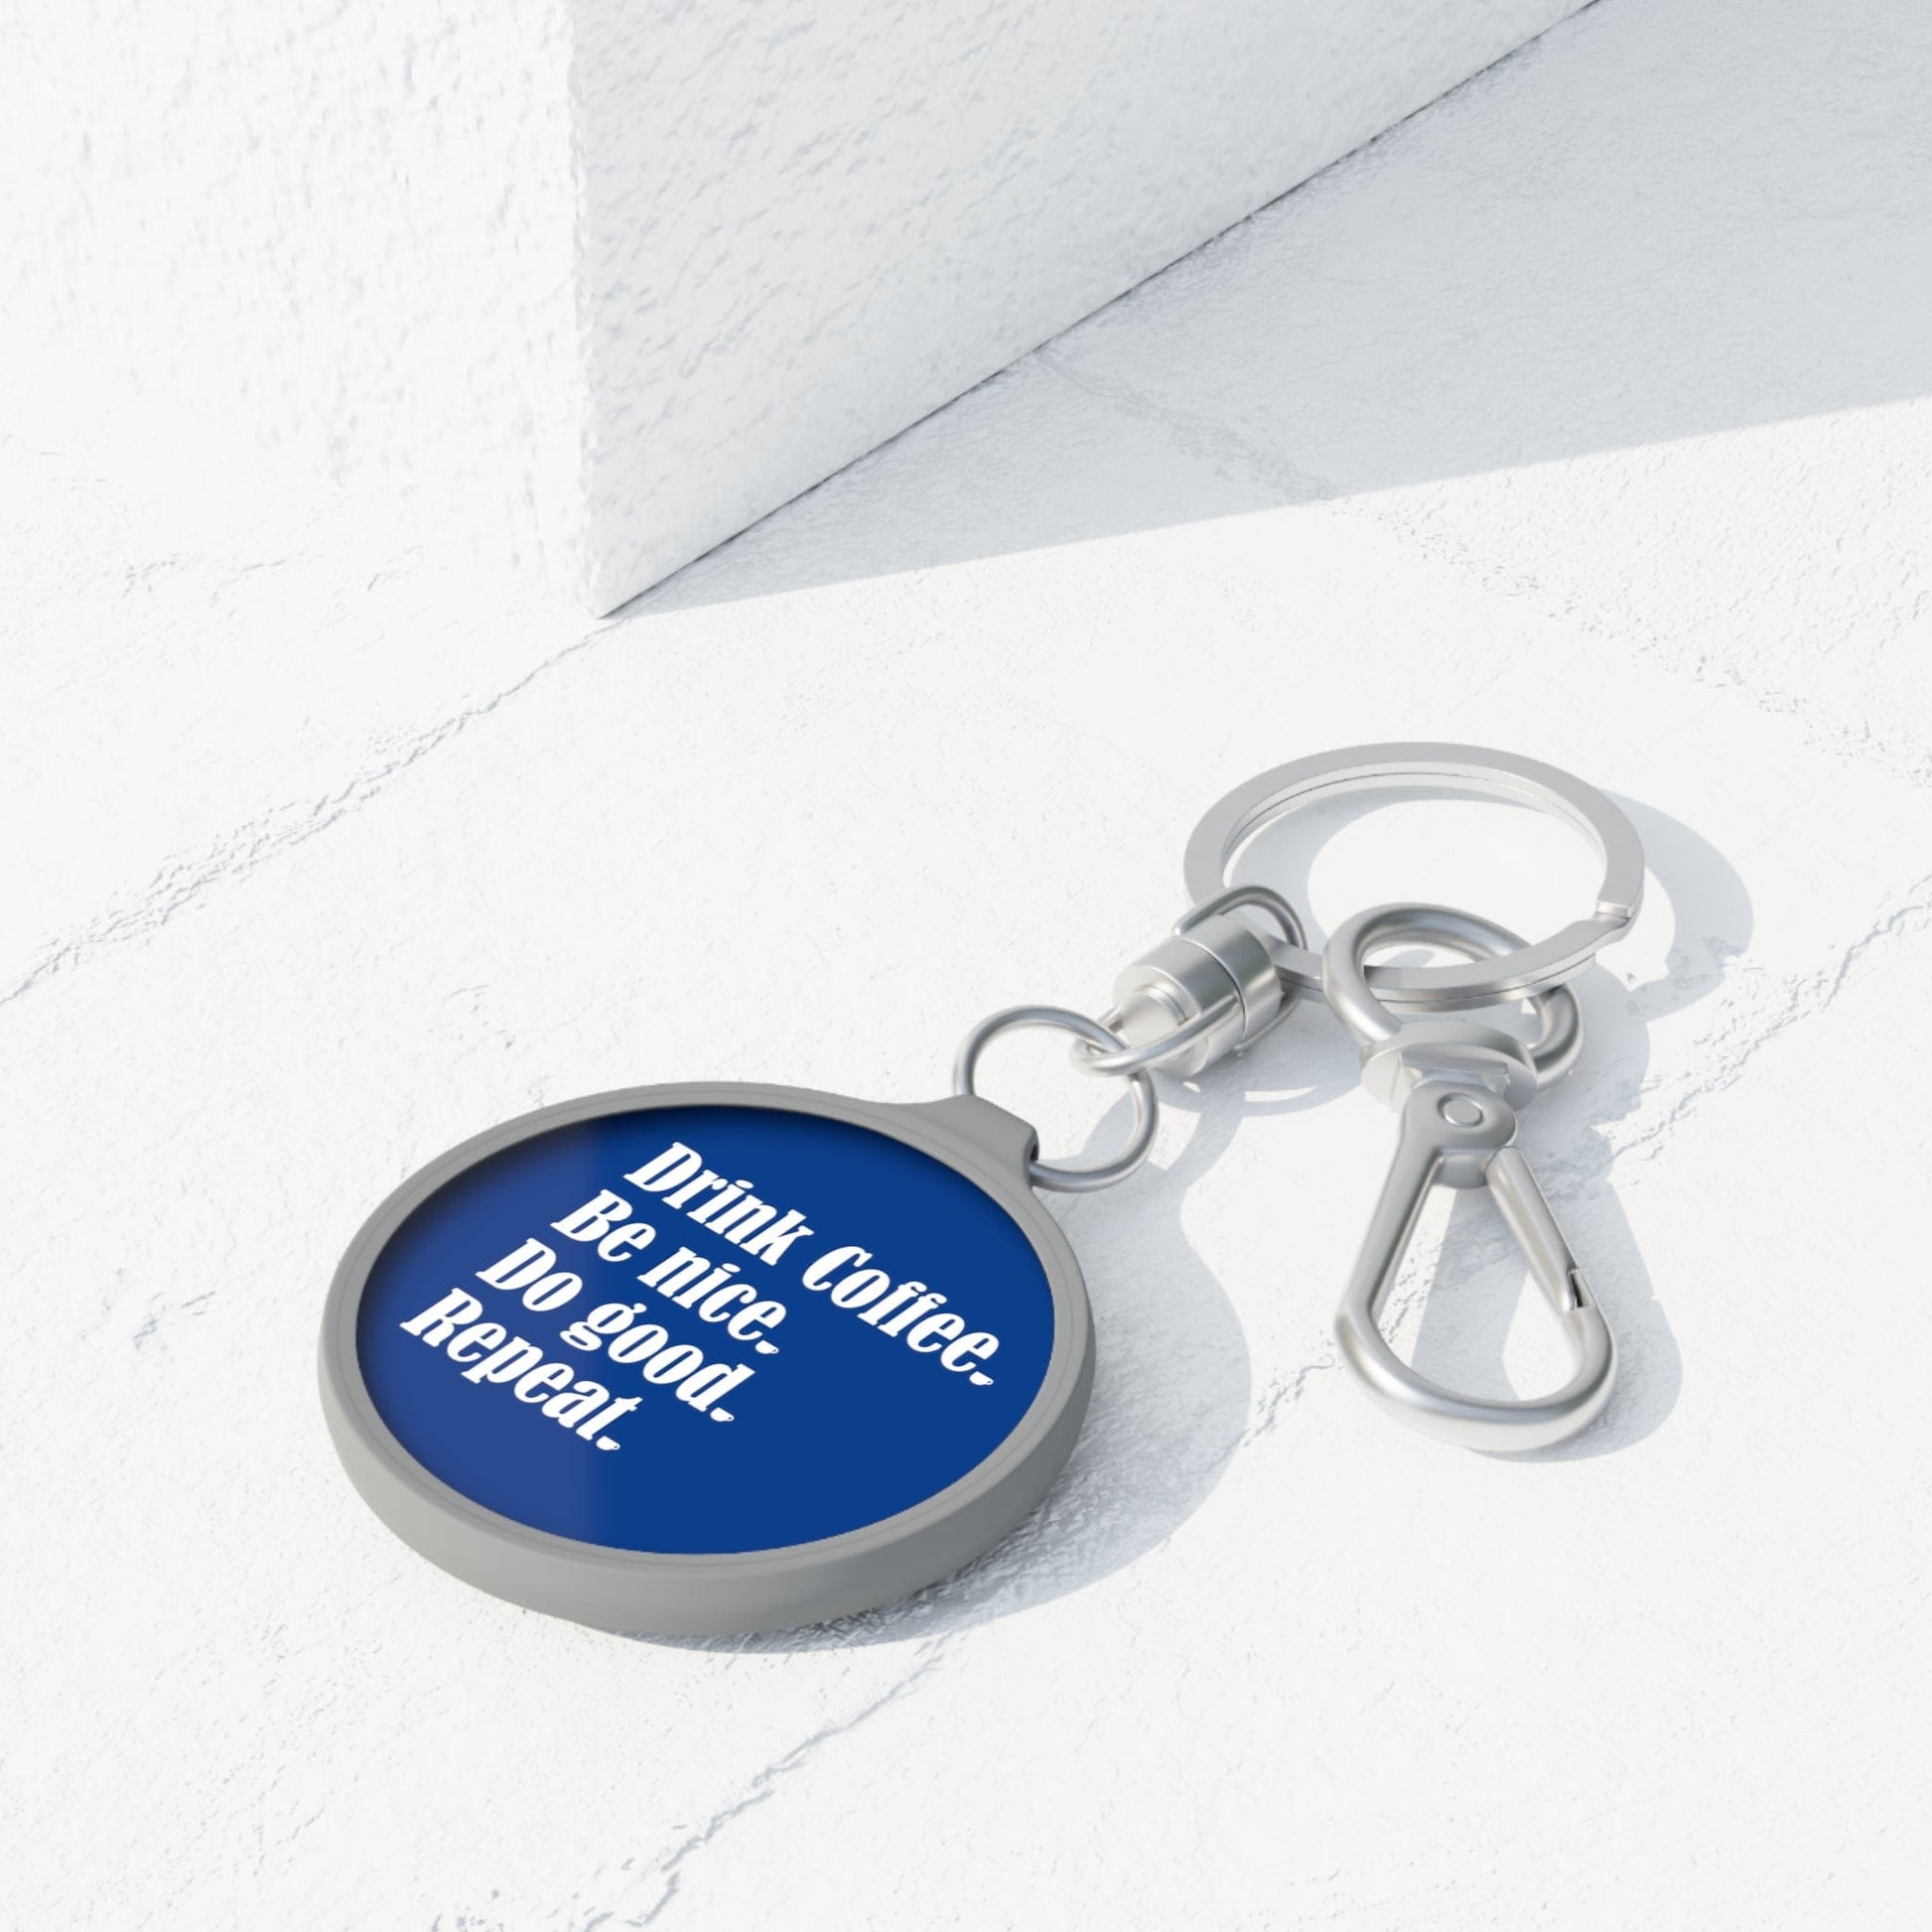 Good Bean Gifts "Drink Coffee, Be Nice, Do Good, Repeat". Keyring Tag (Blue w/gray trim) One size / Grey